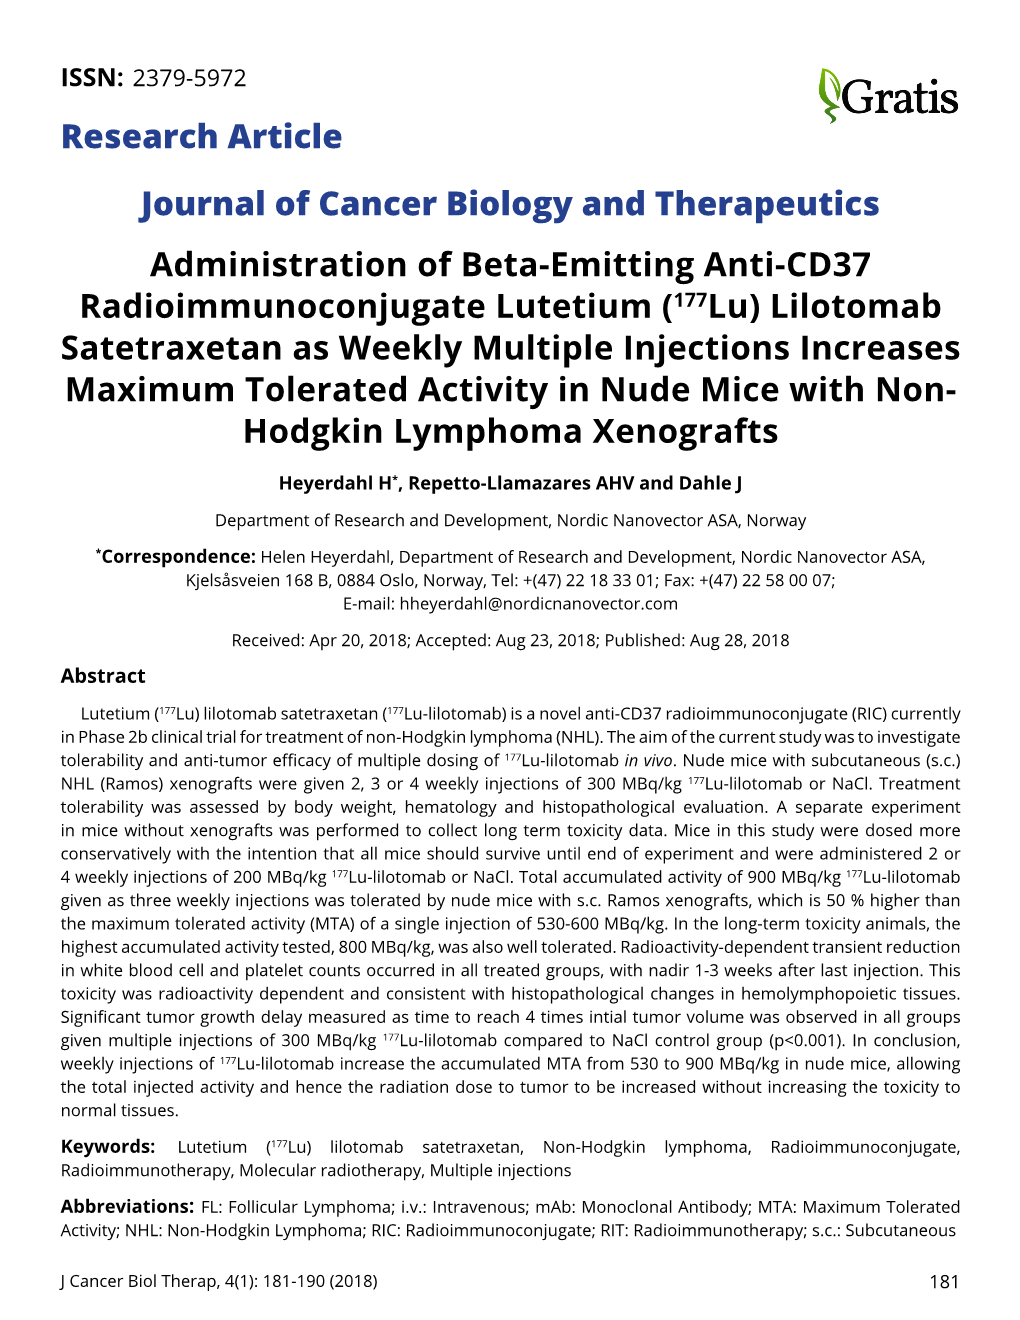 Journal of Cancer Biology and Therapeutics